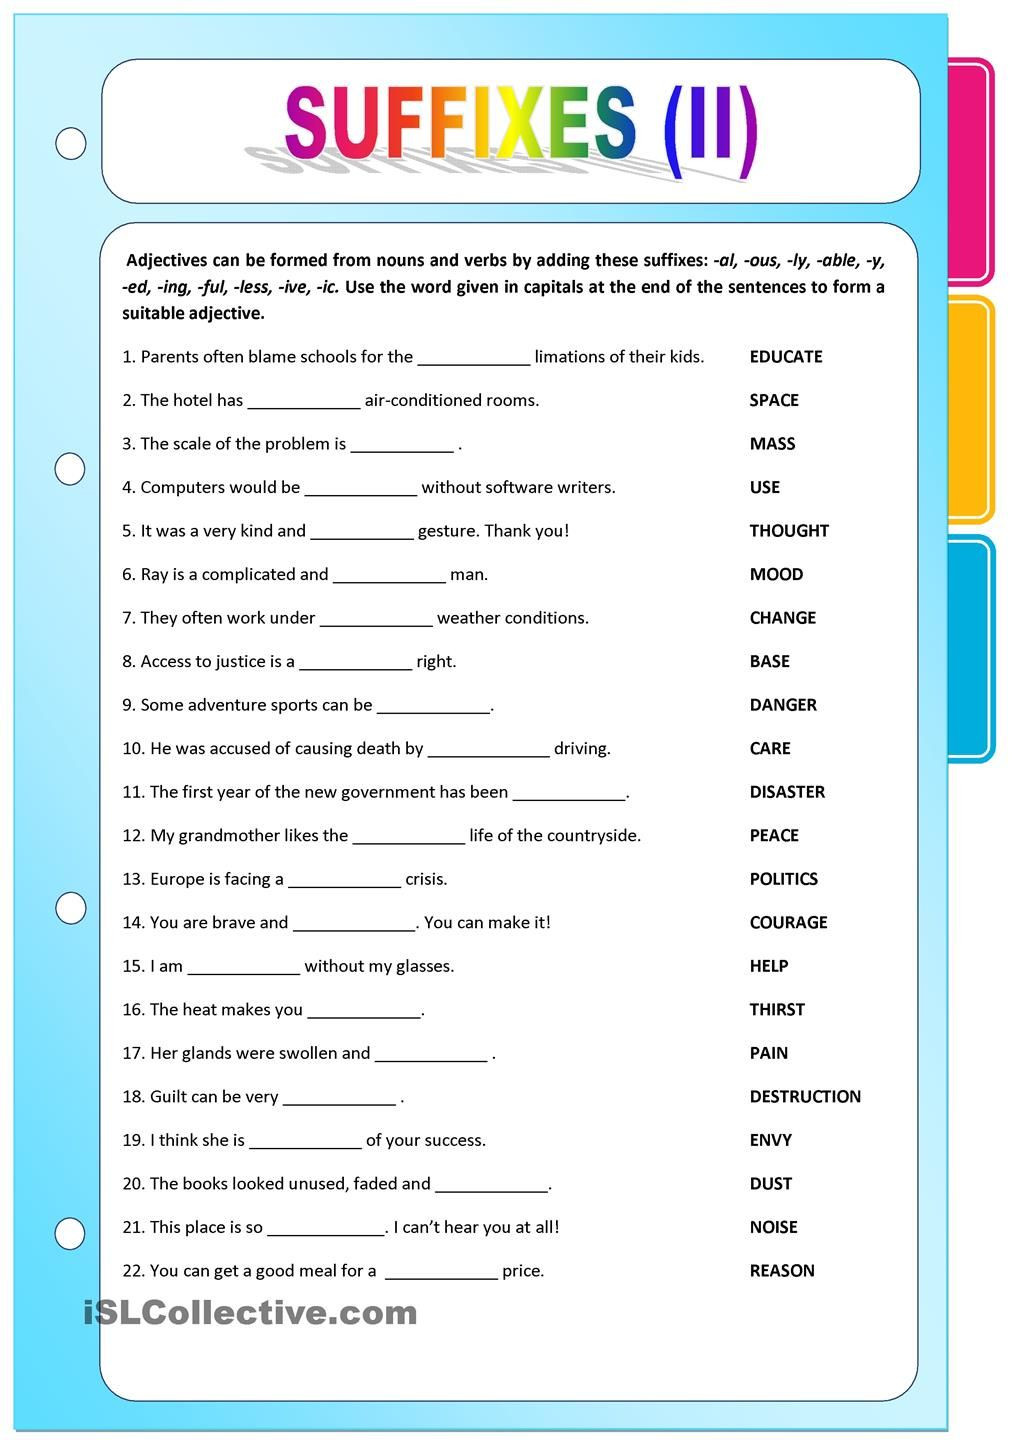 Nouns and Verbs Worksheet Suffixes 2 Adjectives formed From Nouns and Verbs